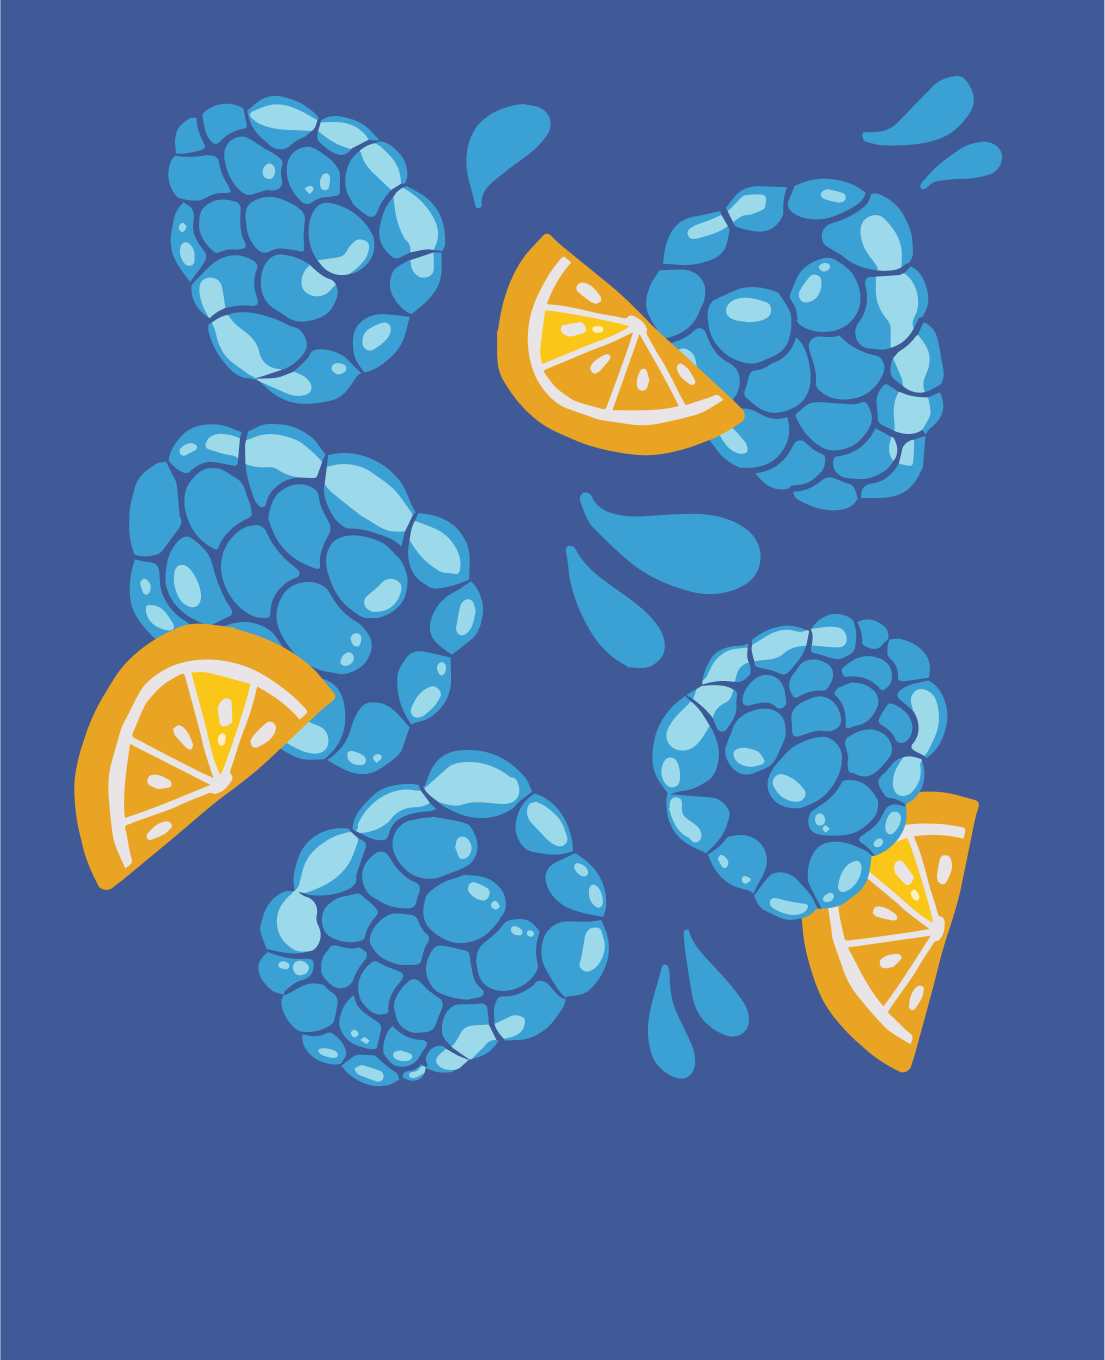 Graphic of blue raspberries and lemons. There are five blue raspberries, three lemon slices, and blue splash marks. The background is a darker blue.